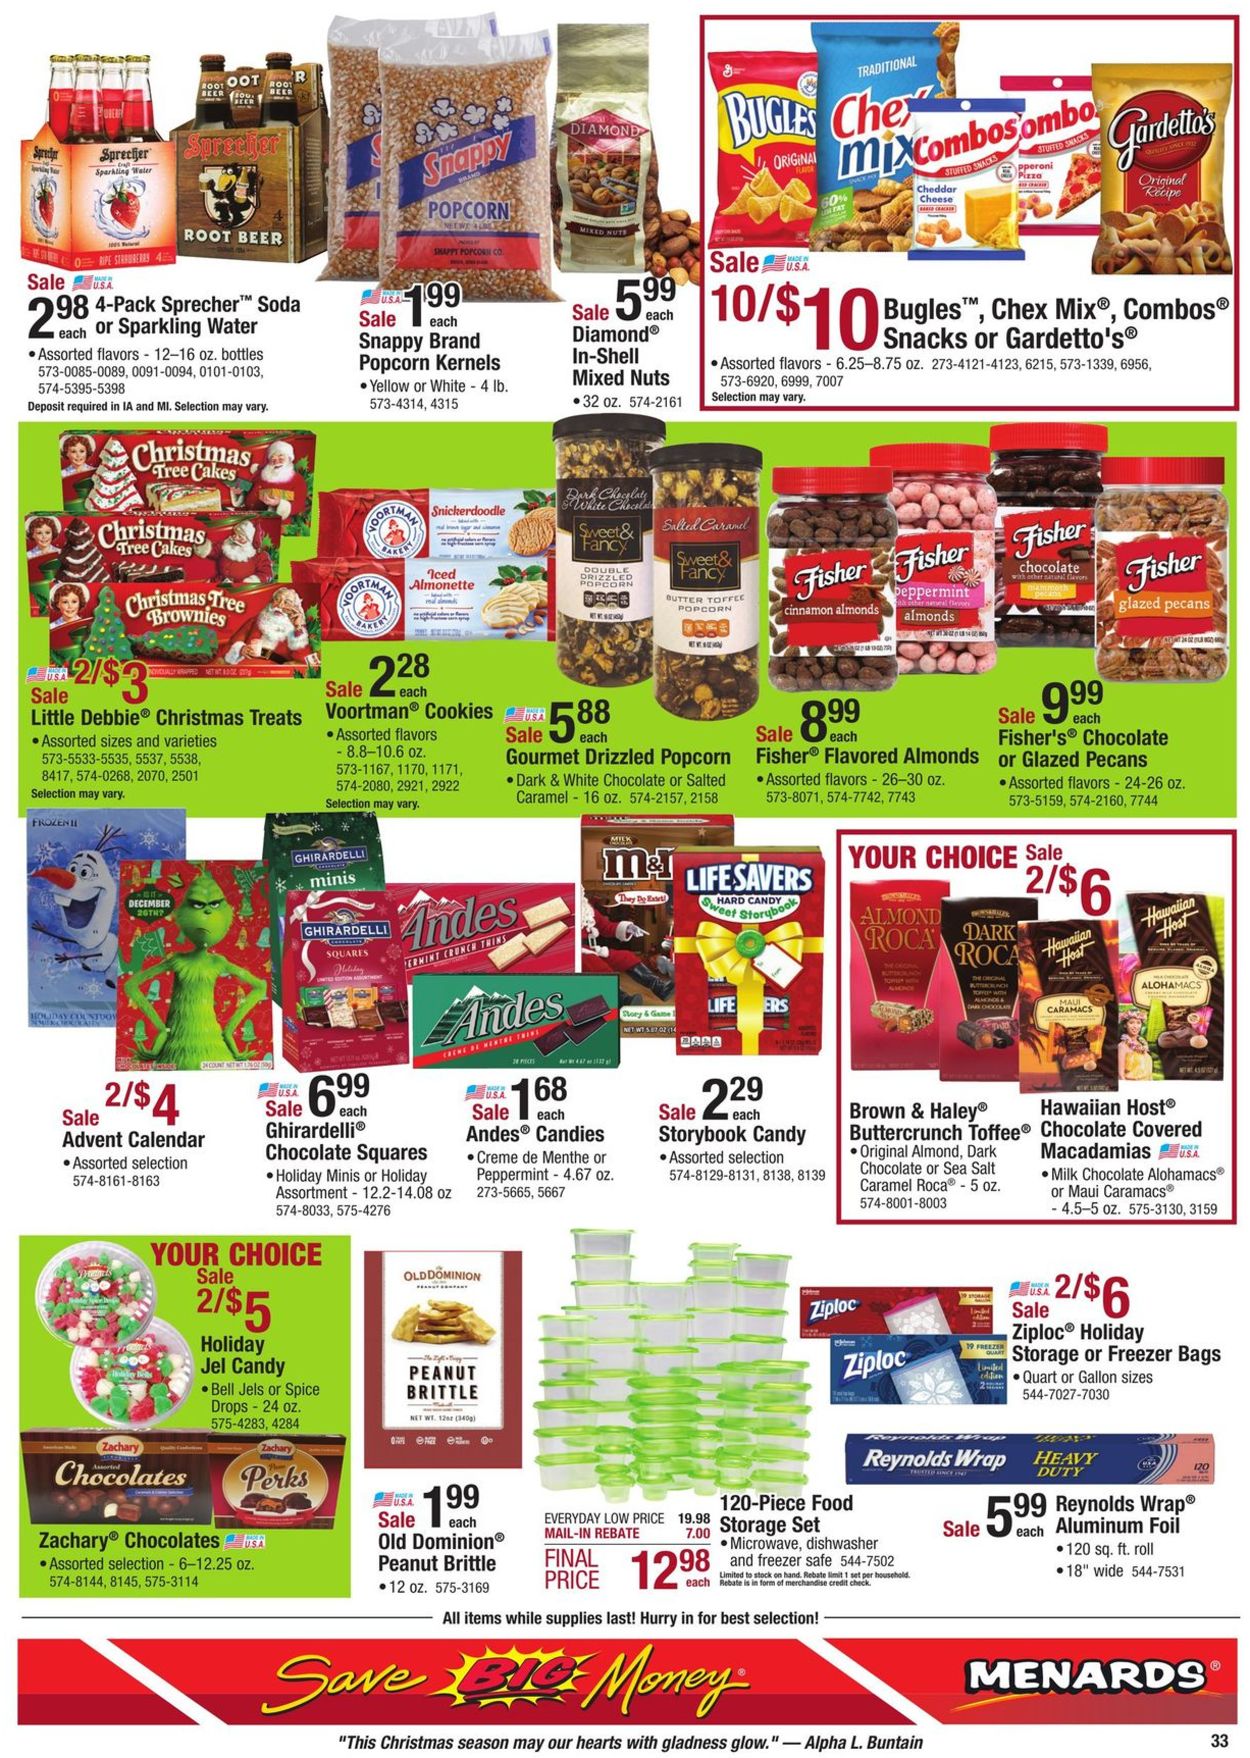 Menards - Christmas Ad 2019 Current weekly ad 11/24 - 12/07/2019 [34] - 0